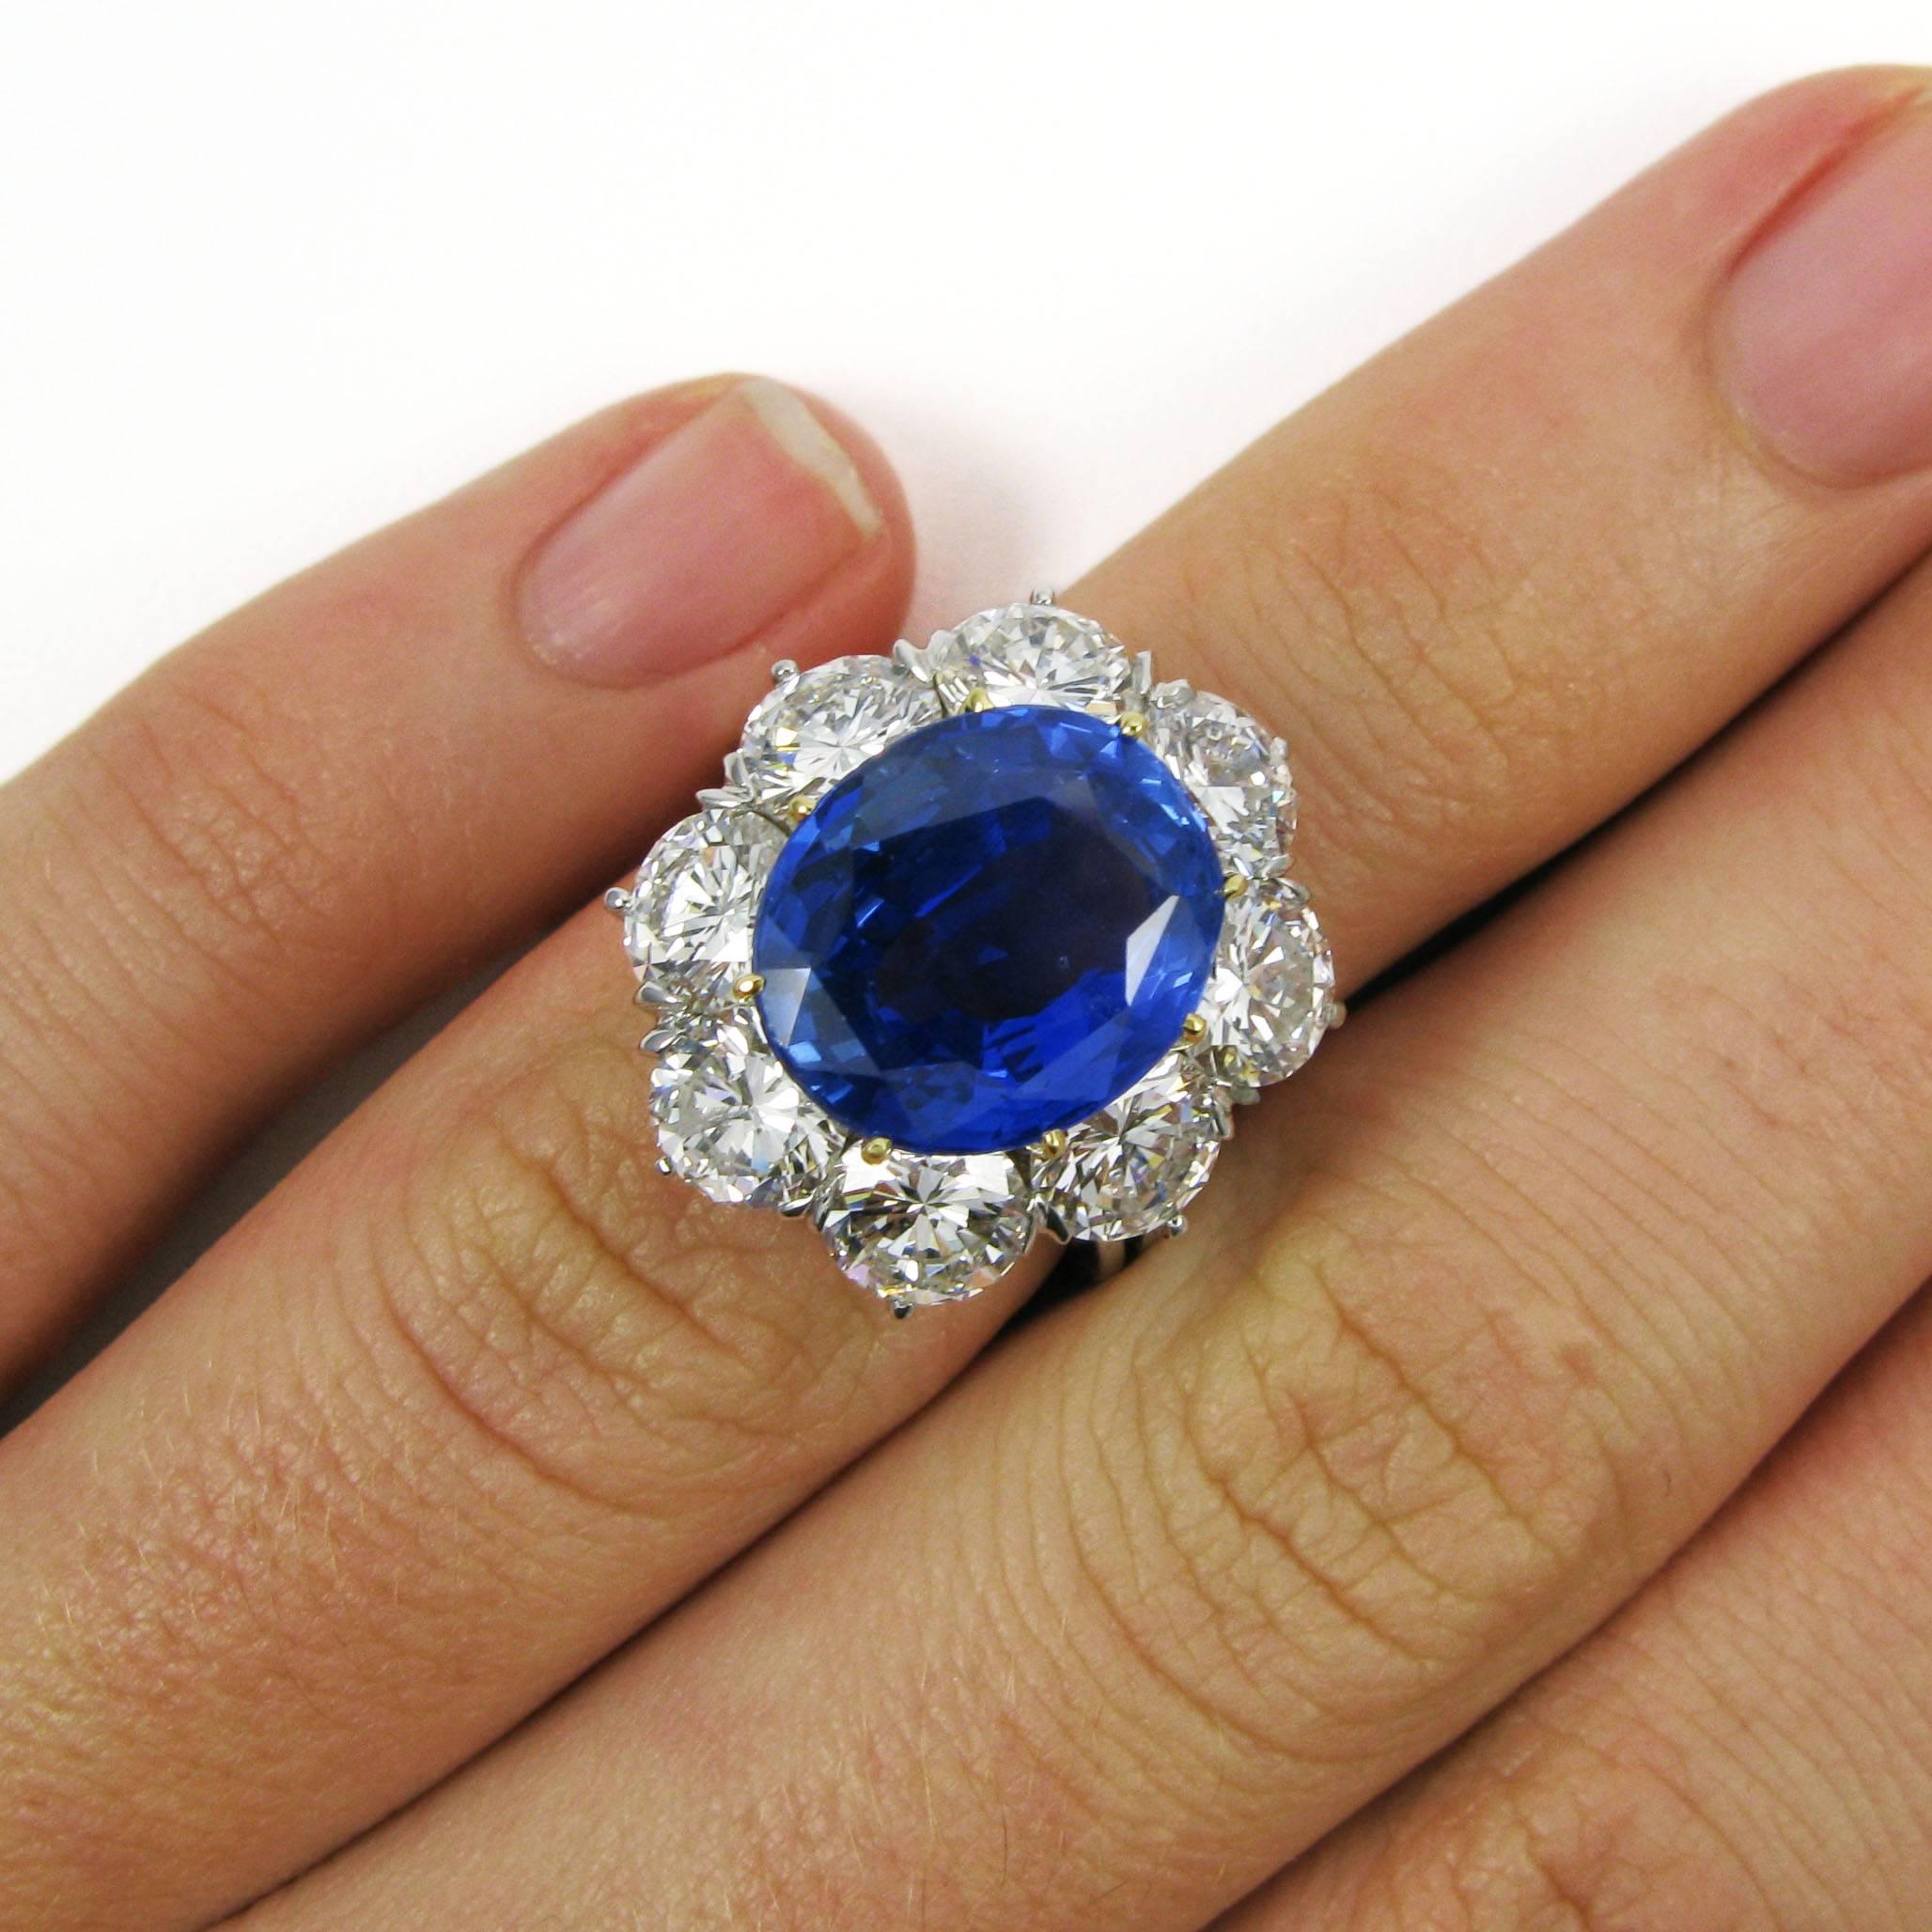 An important and lovely piece, this platinum ring features a vibrant 7.28 carat oval sapphire prong set in yellow gold and surrounded by eight round brilliant-cut diamonds totaling approx. 4.85 carats atop a thin white gold split ring shank.